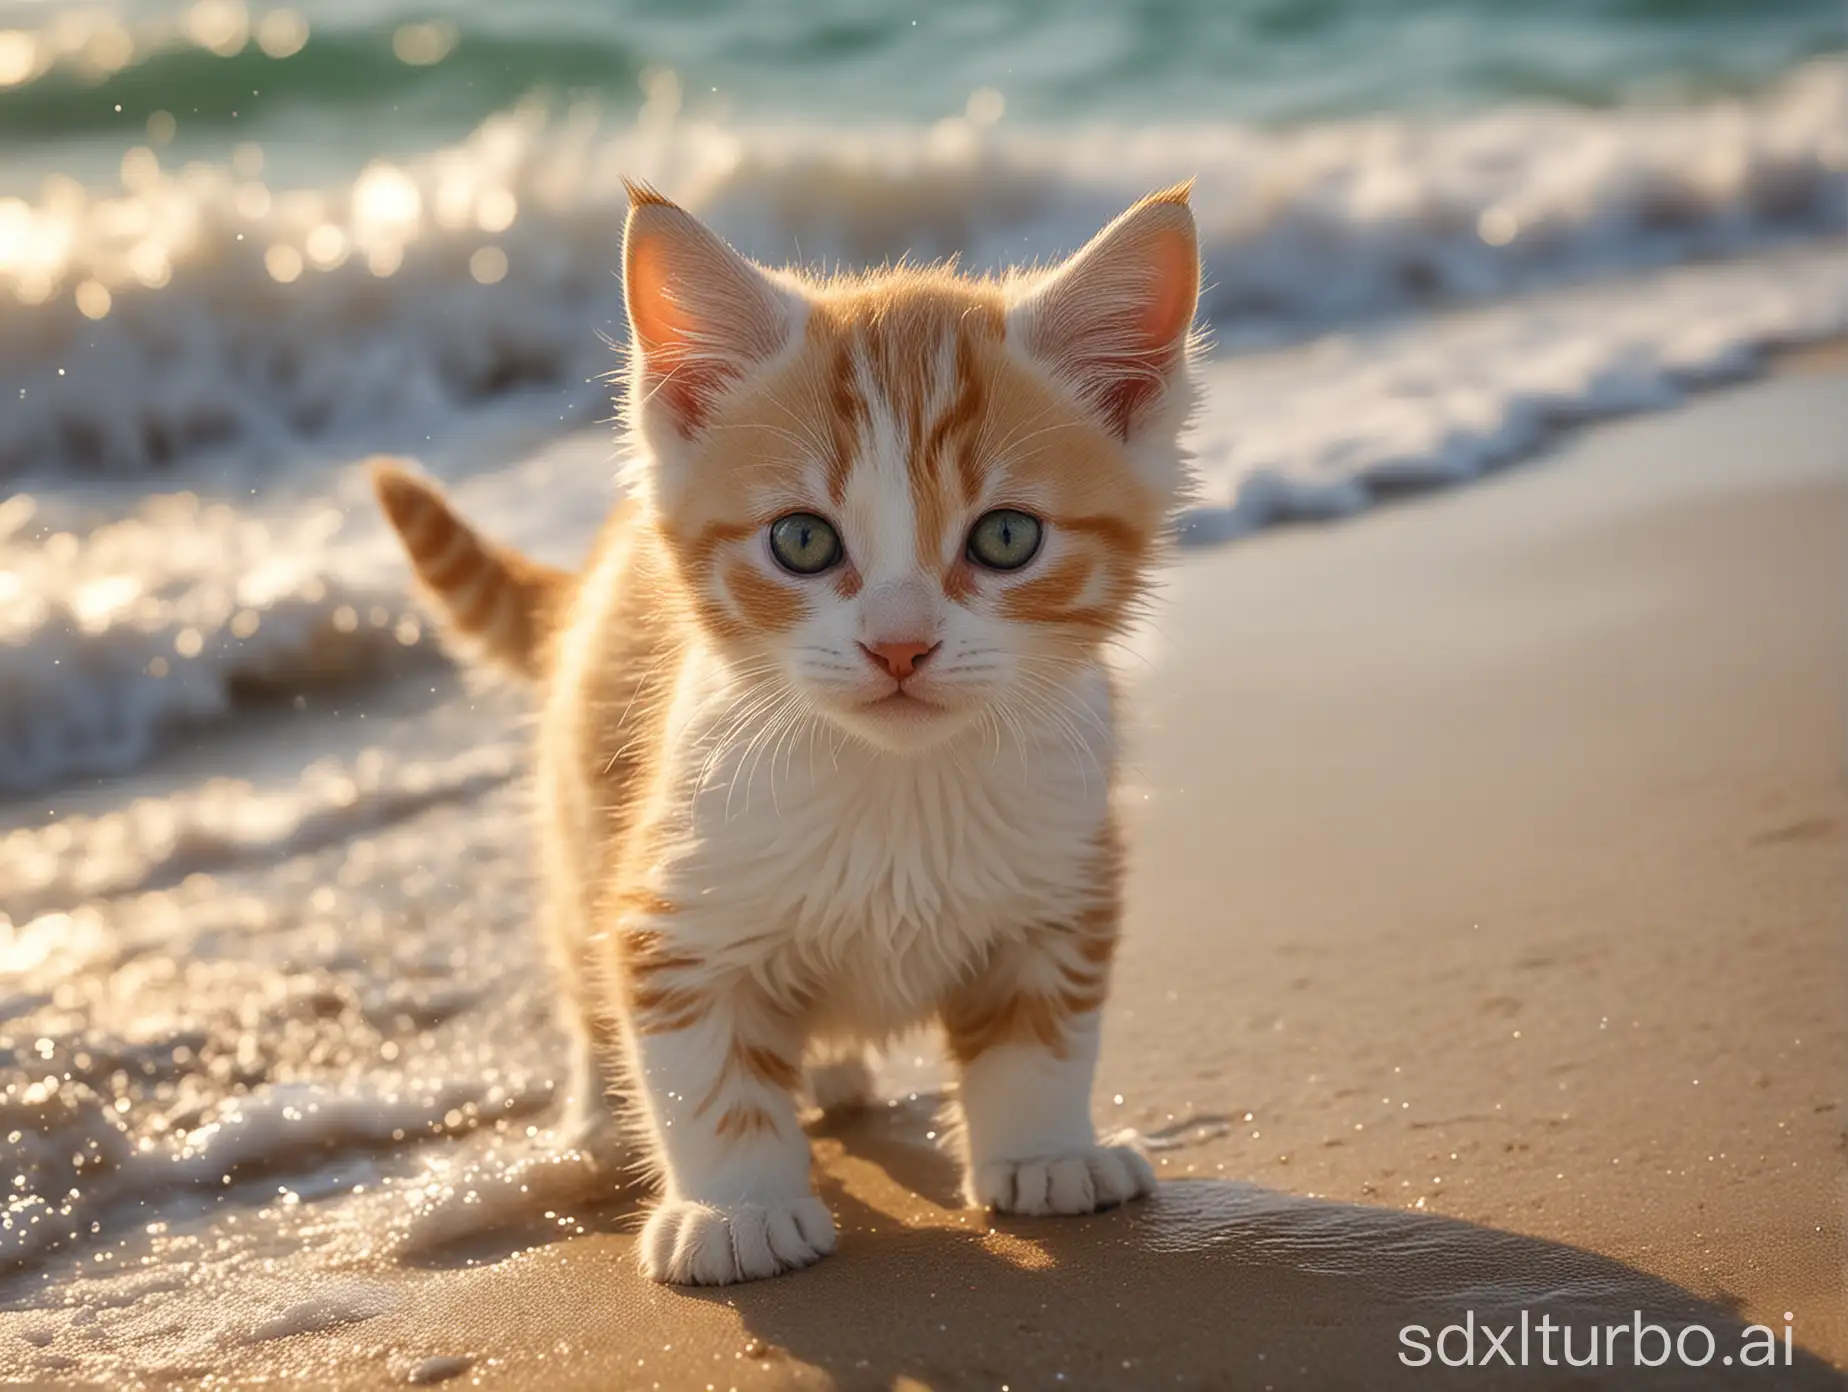 On the boundless seaside, the waves roll and the sea breeze blows. A brightly colored kitten stood on the beach, its agile eyes gazing at the sea. Suddenly, the kitten vigorously kicked its hind legs and jumped up lightly. Its small body curved in the air before landing steadily on the the beach. It jumps again, as if playing with the sea, with the sunlight shining on it, creating a vibrant scene.